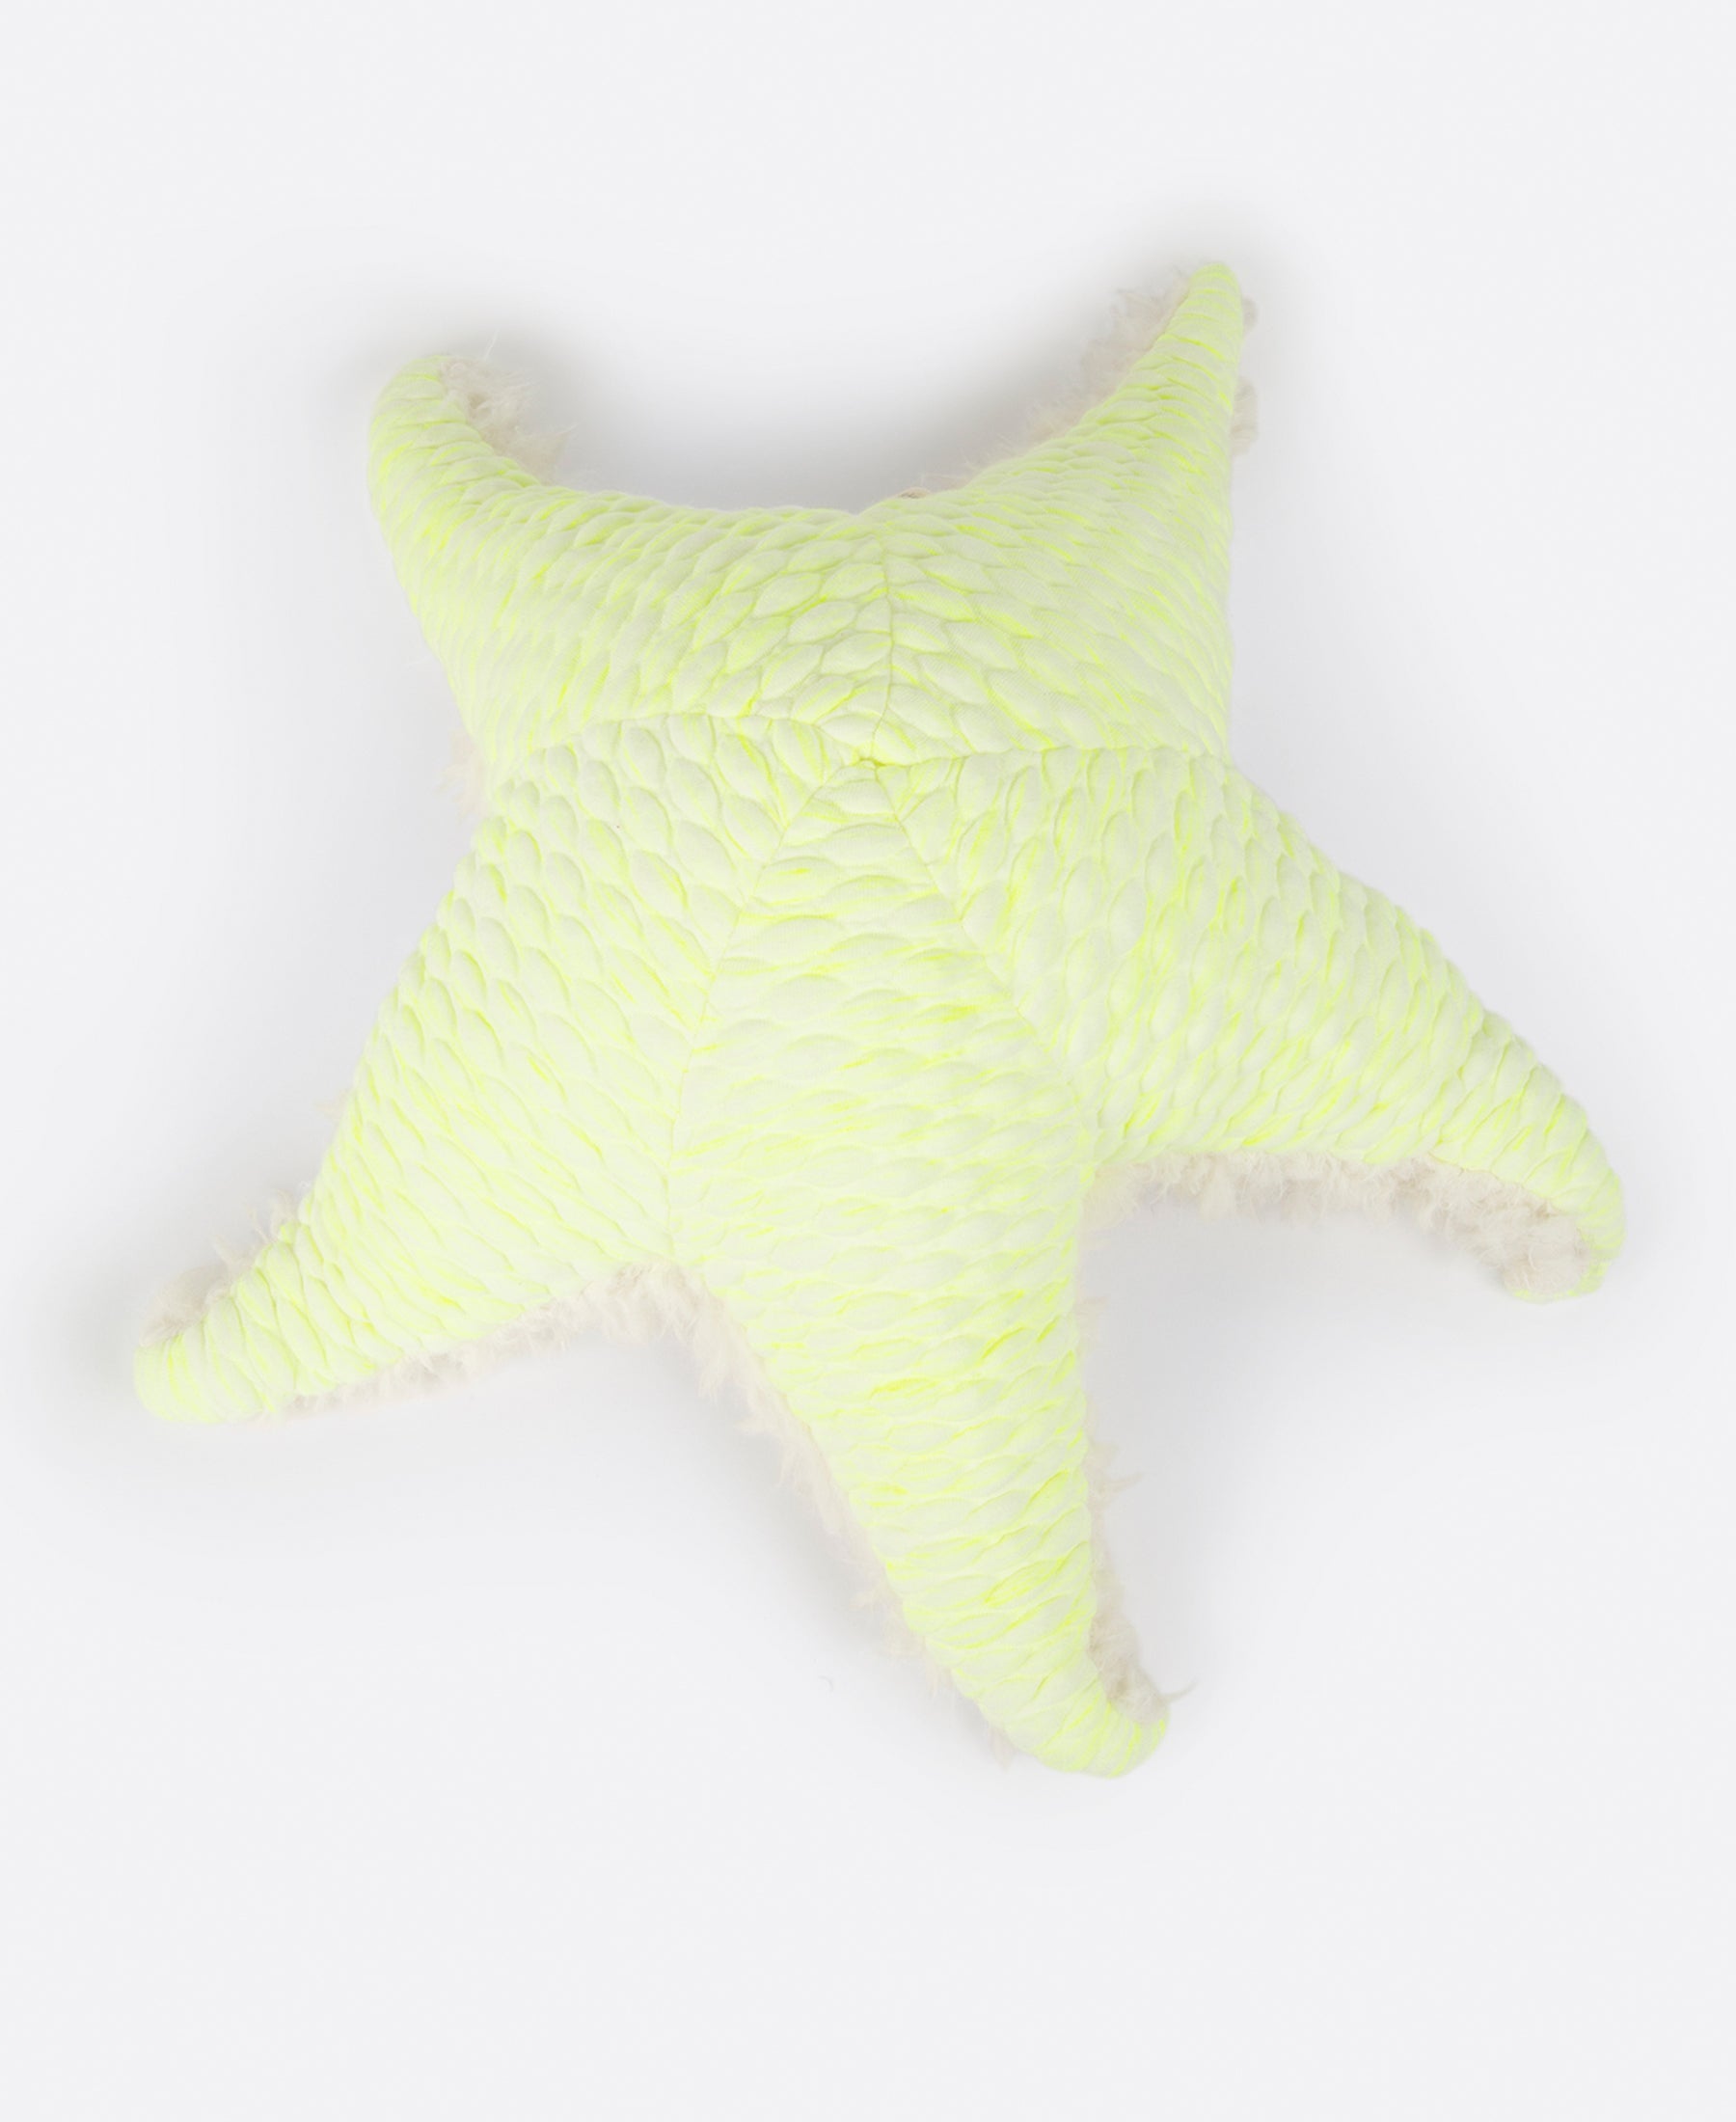 A neon yellow starfish stuffed animal, shown from above.